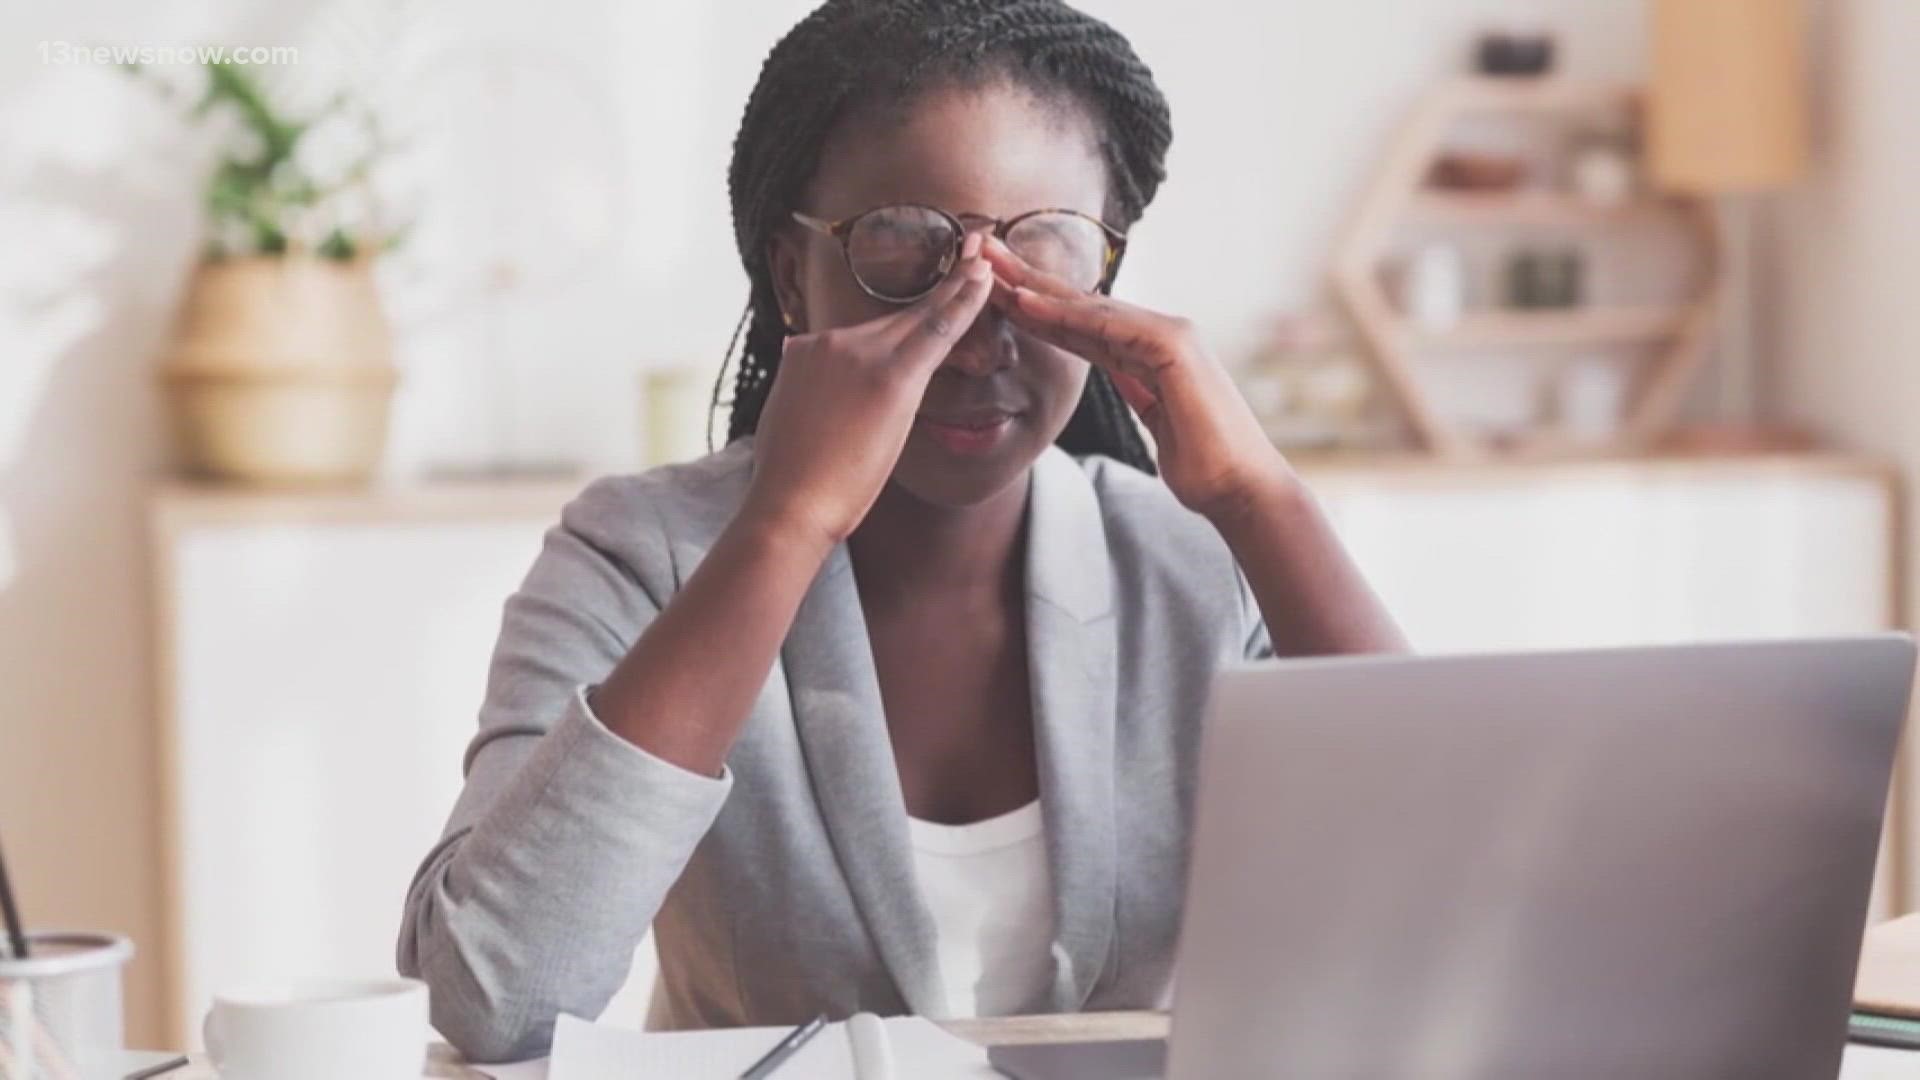 A recent study found that one in five workers regret quitting their old job while an almost equal amount expressed remorse about their new gig.